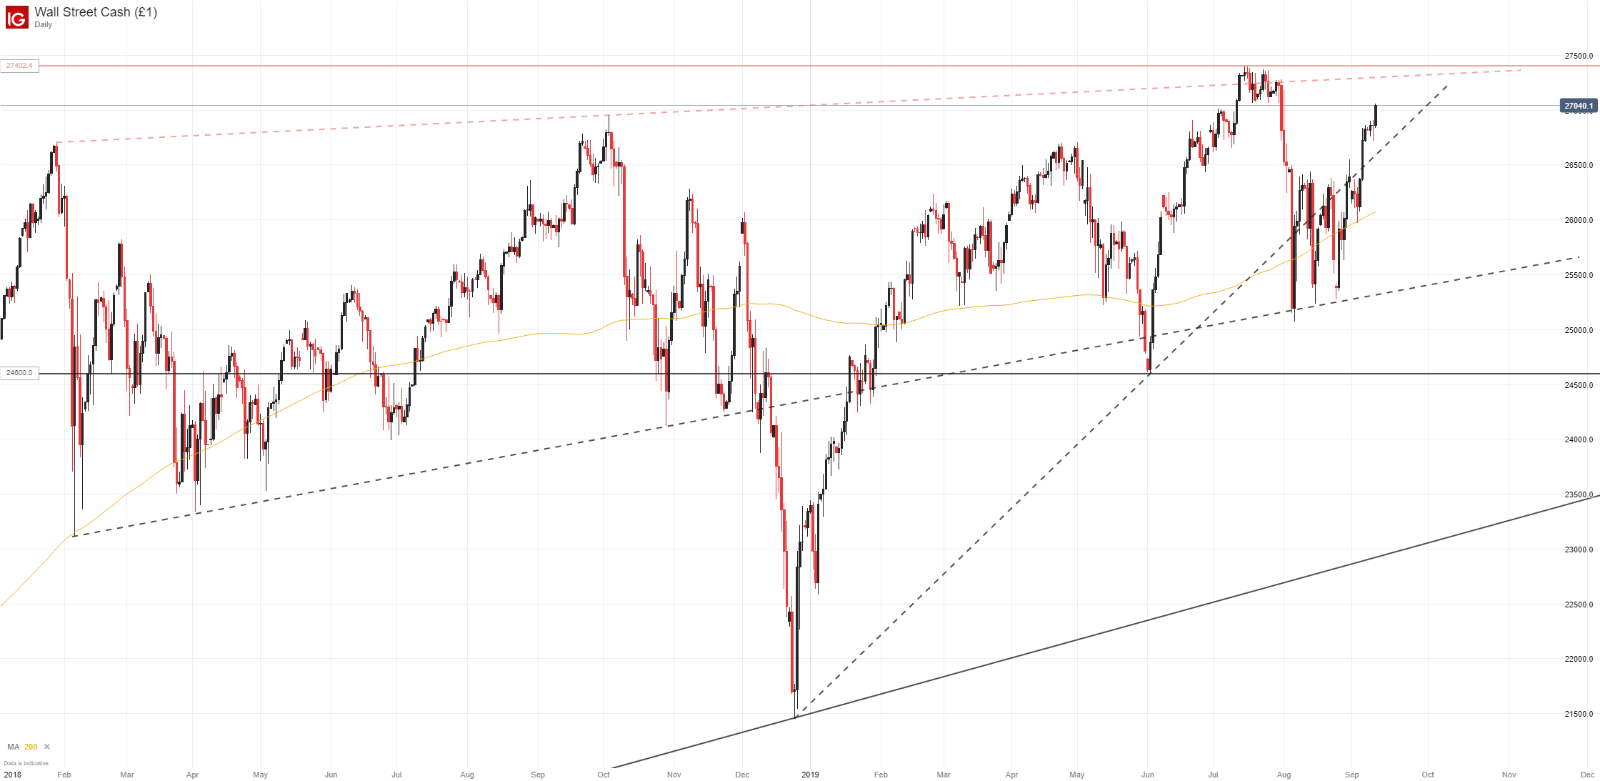 Dow Jones Technical Forecast: DJIA May Grasp at Record Highs